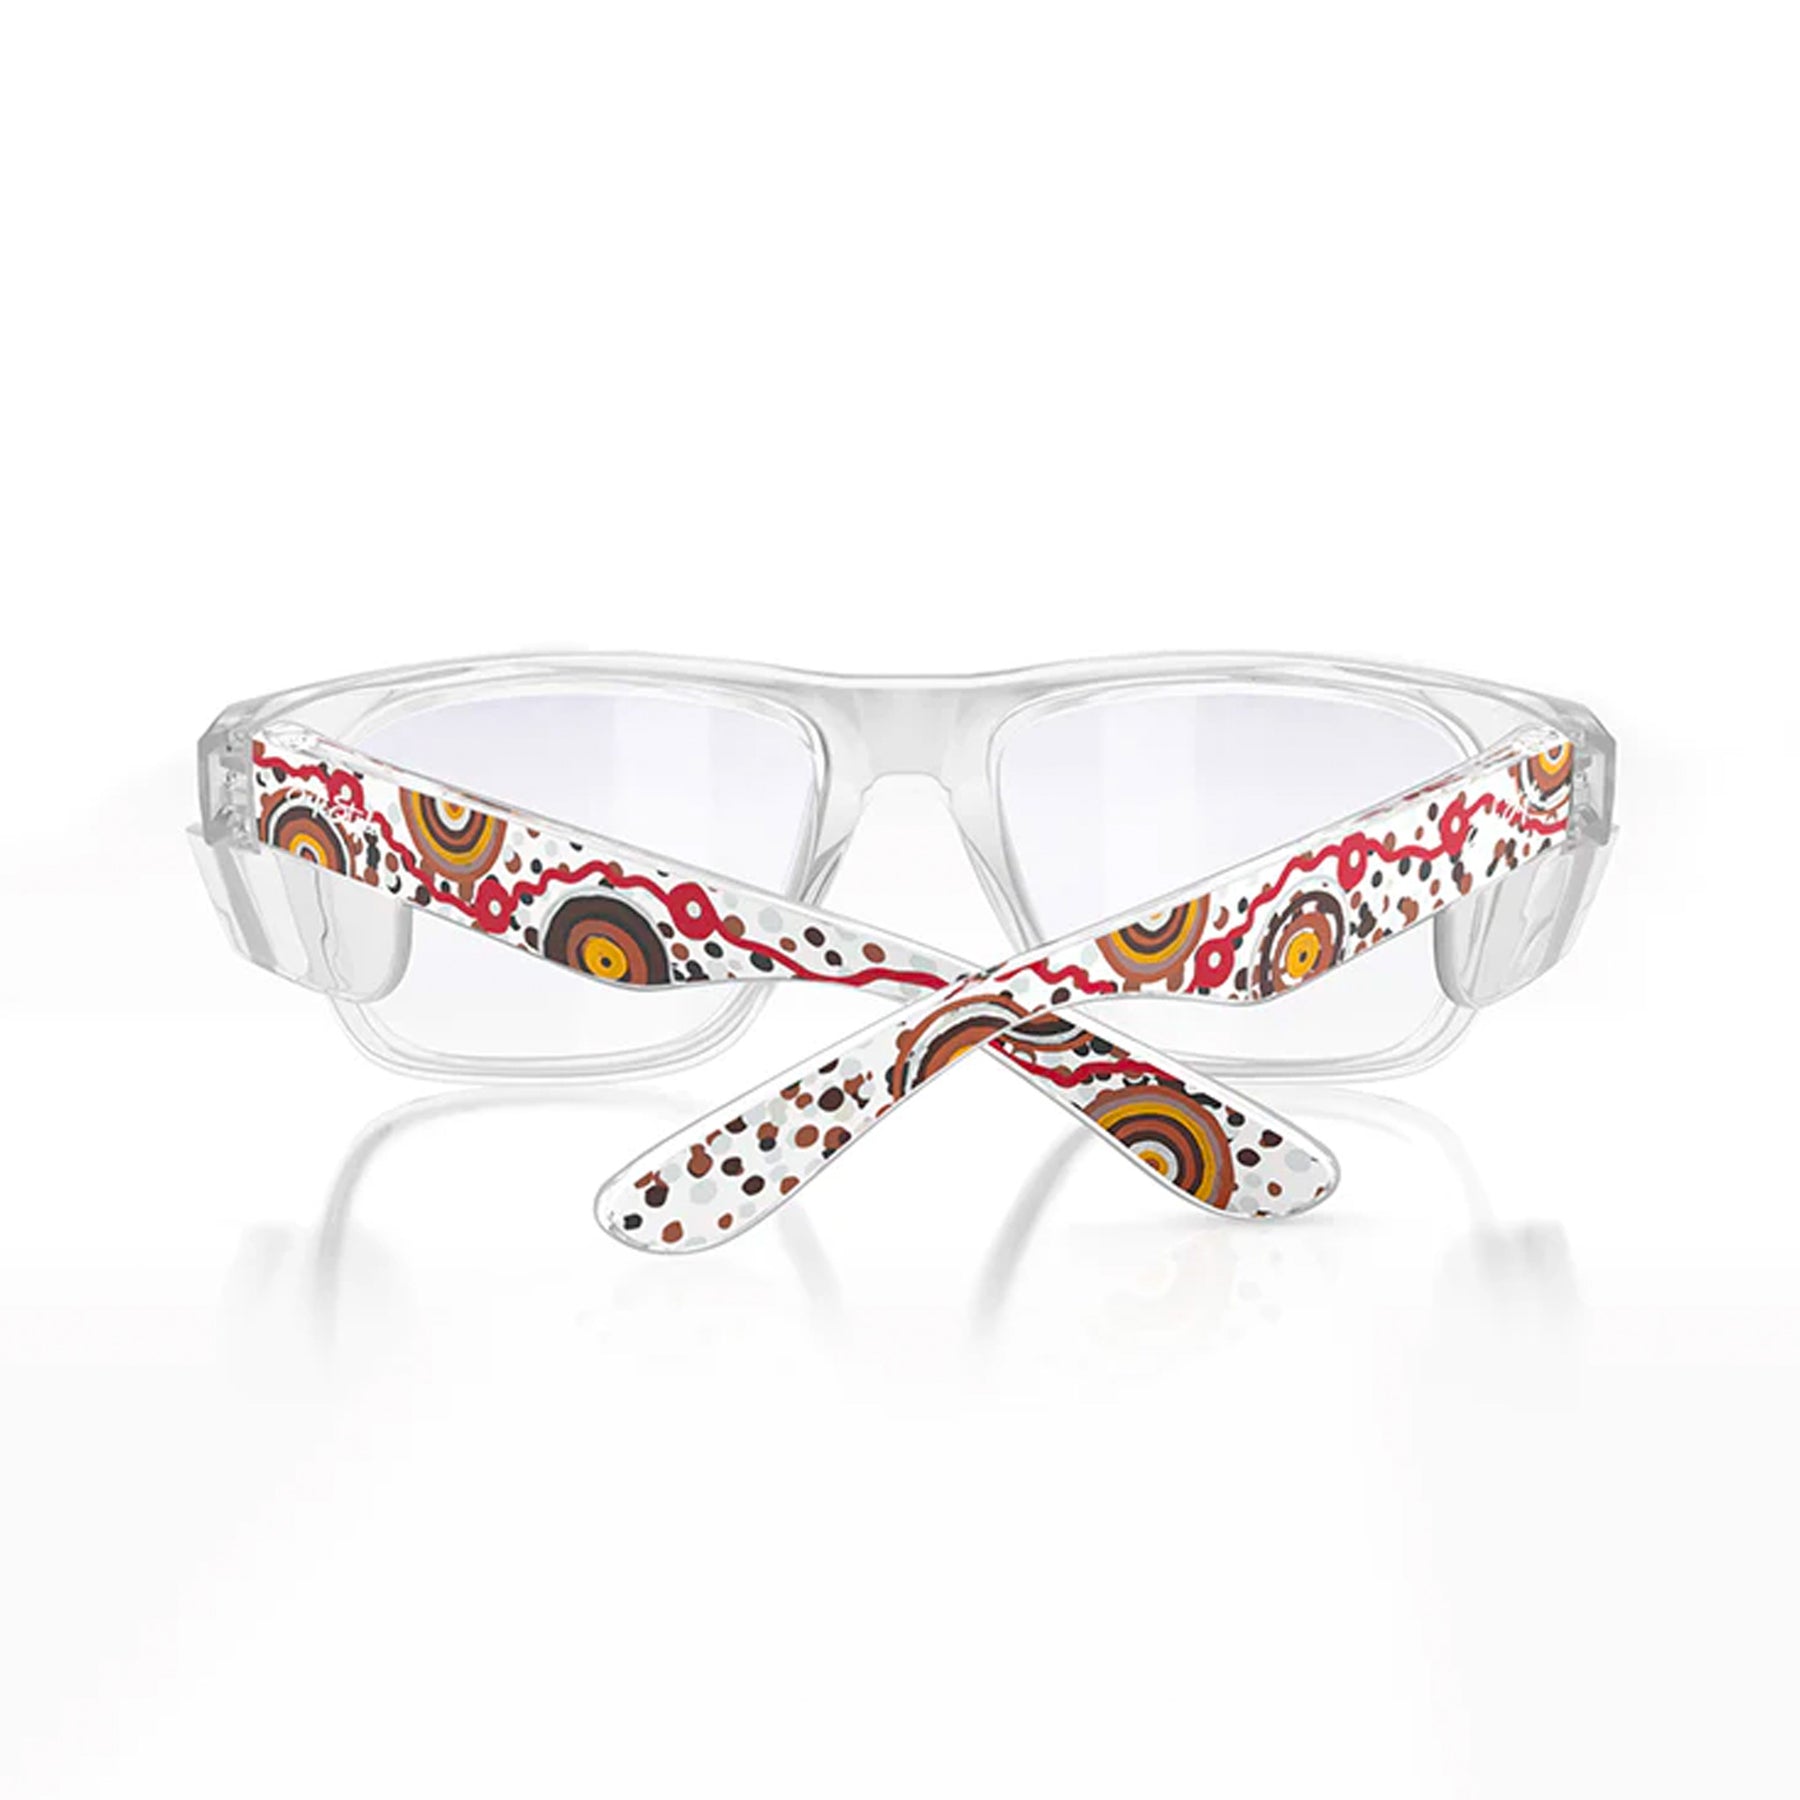 safestyle fusions clear frame clear lens glasses with indigenous art volume 1